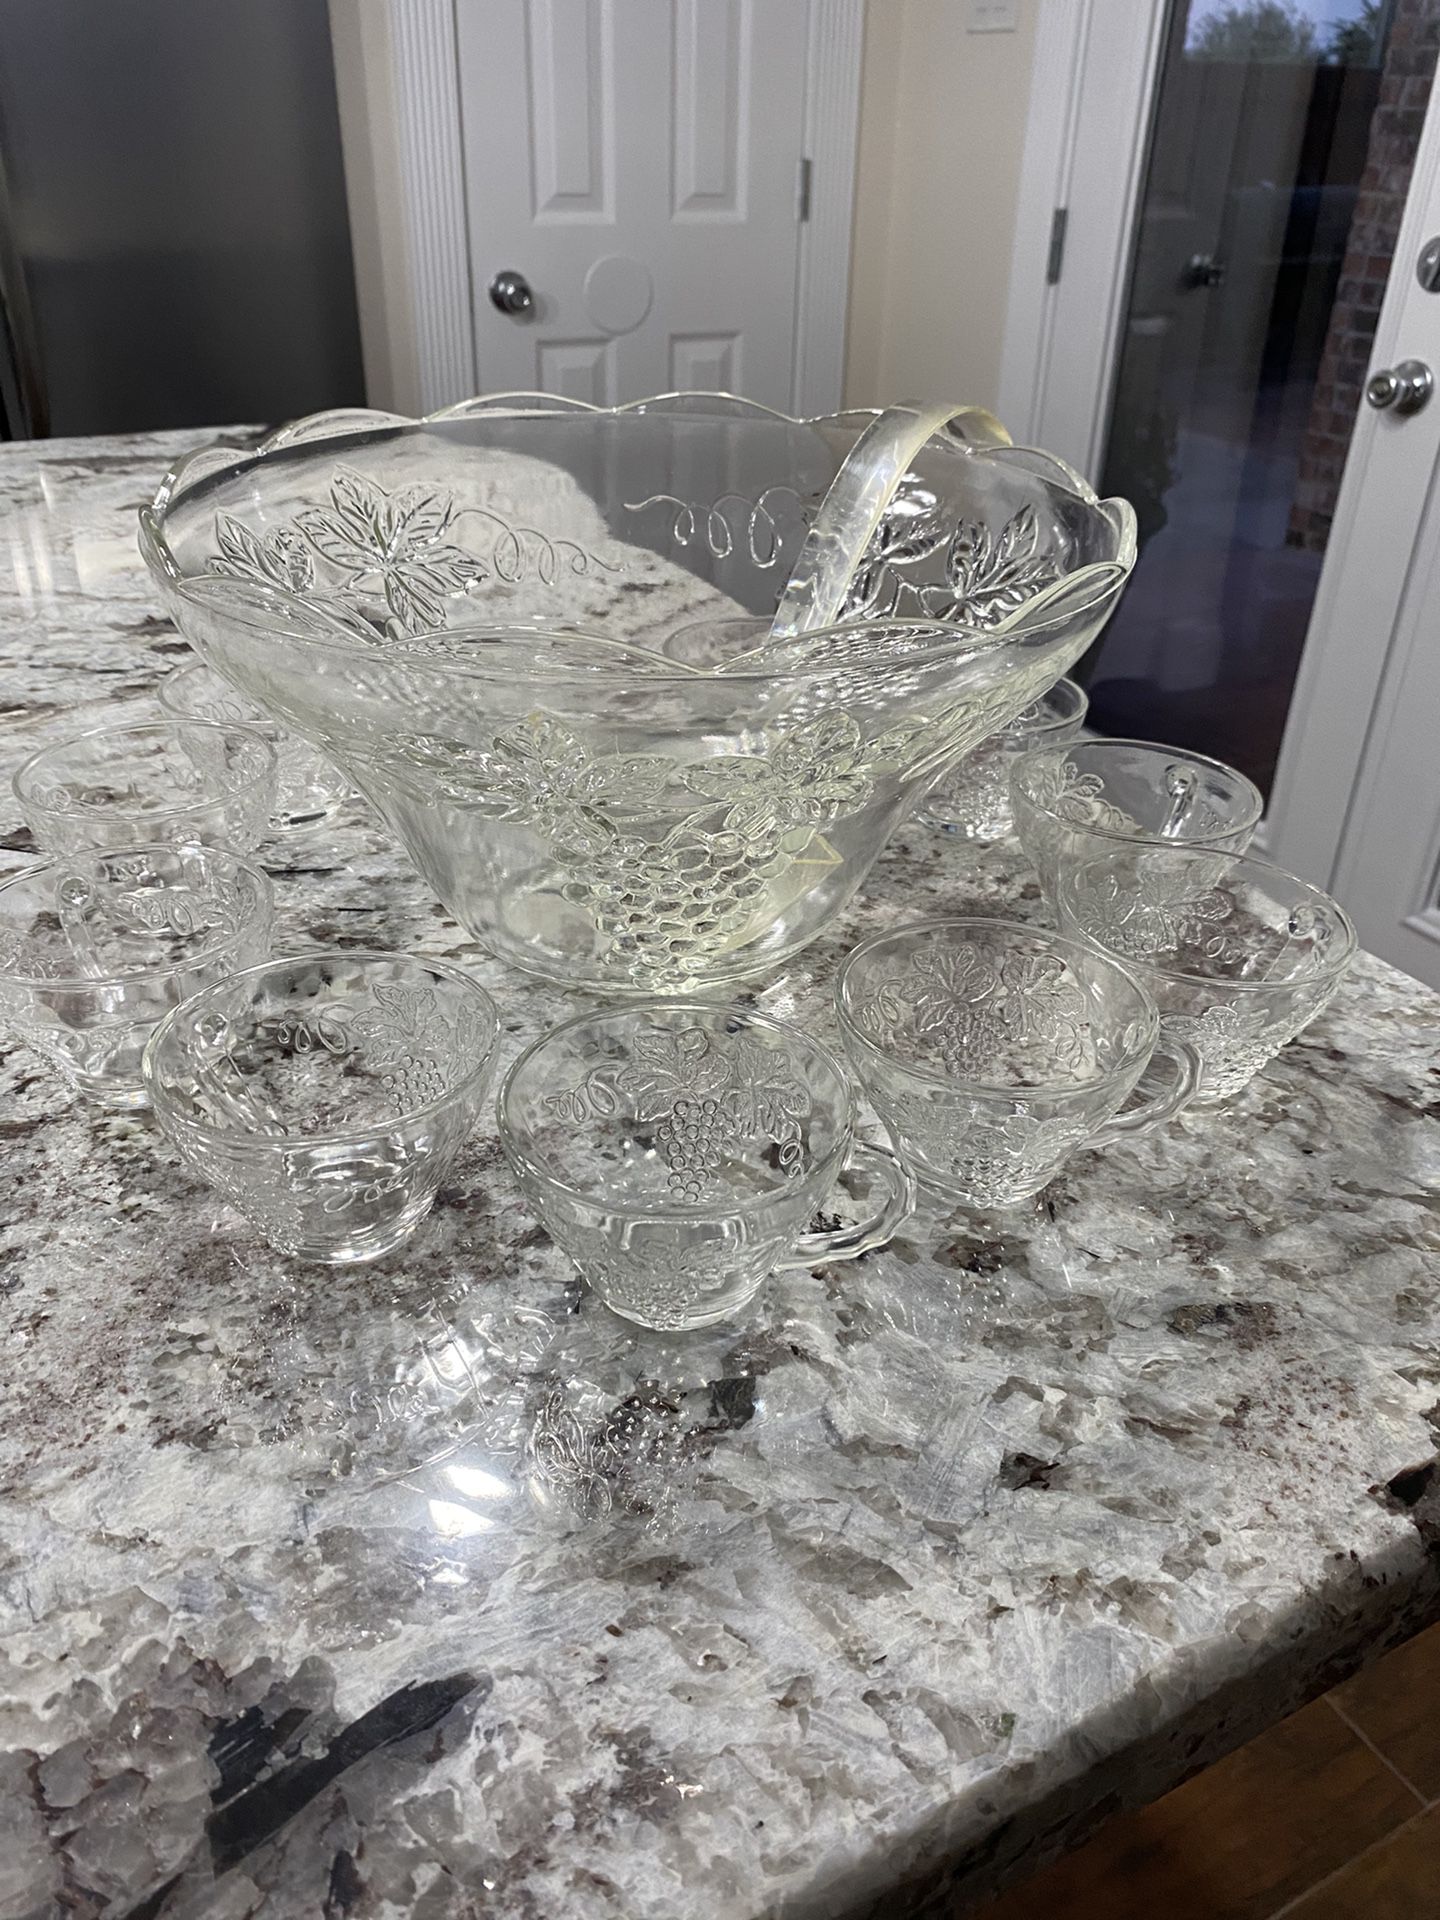 Glass Punch Bowl With Cups